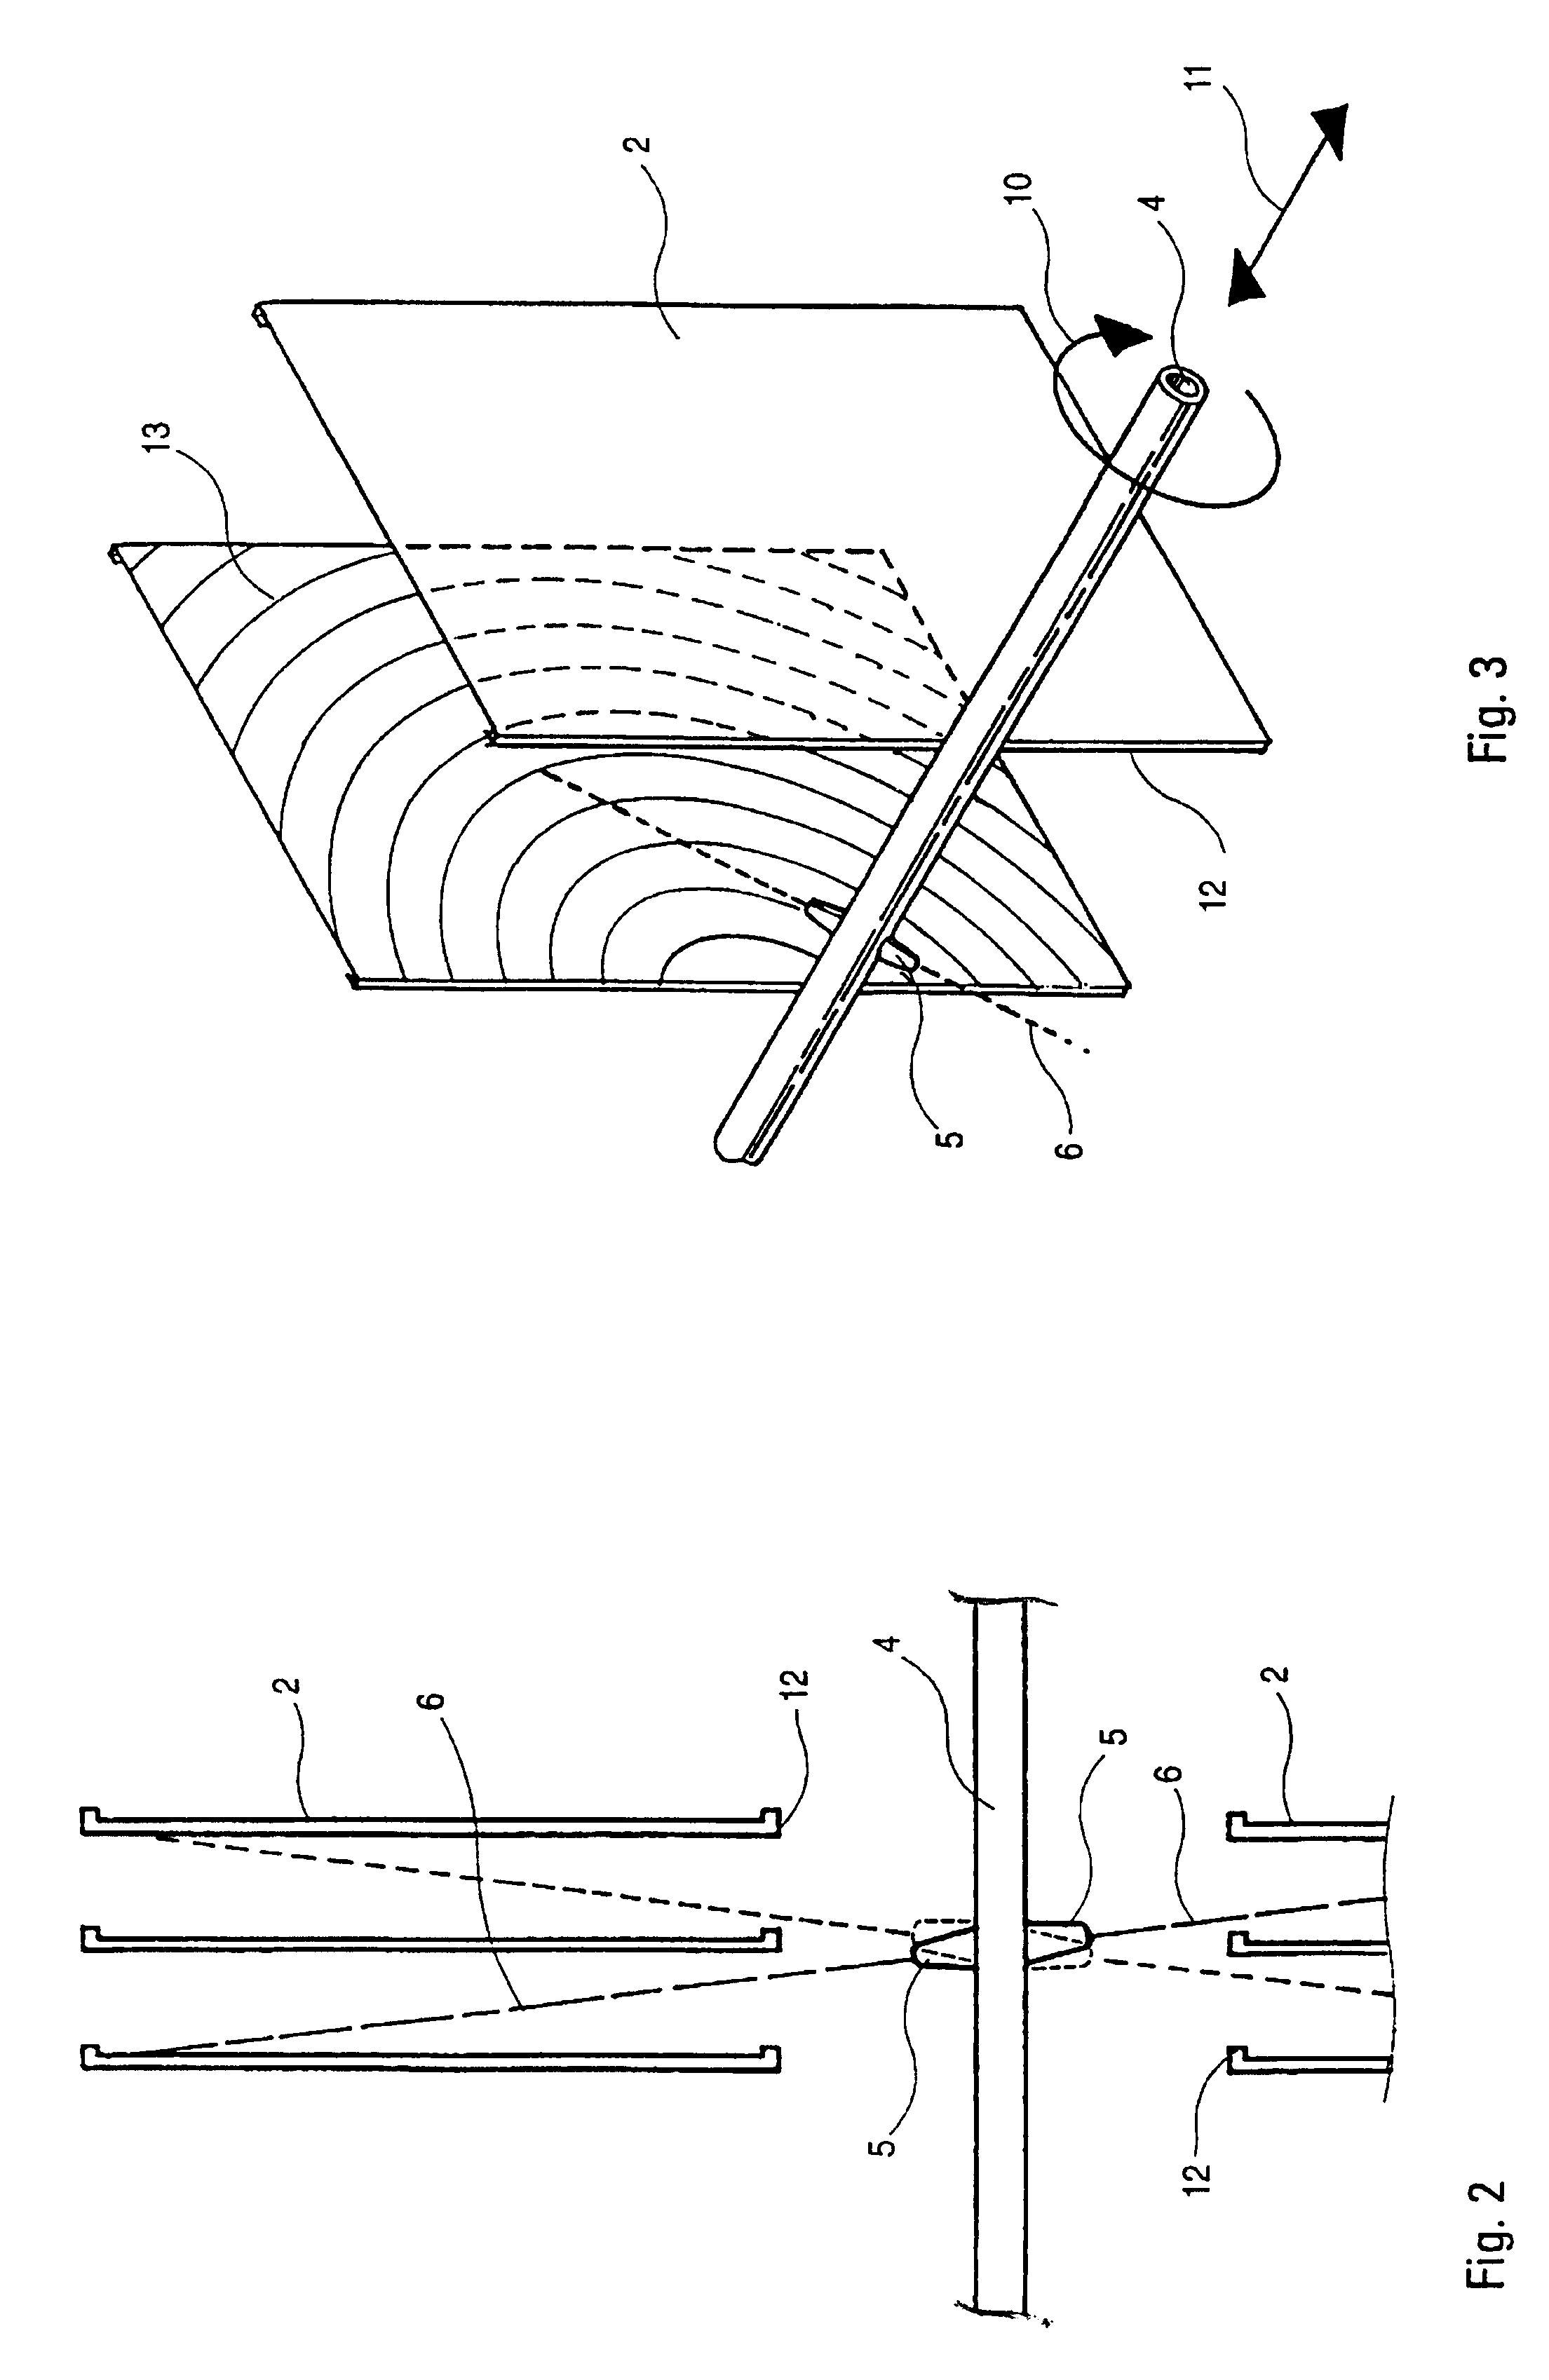 Method and rinsing equipment for the cleaning of especially filter plates in an electro-filter